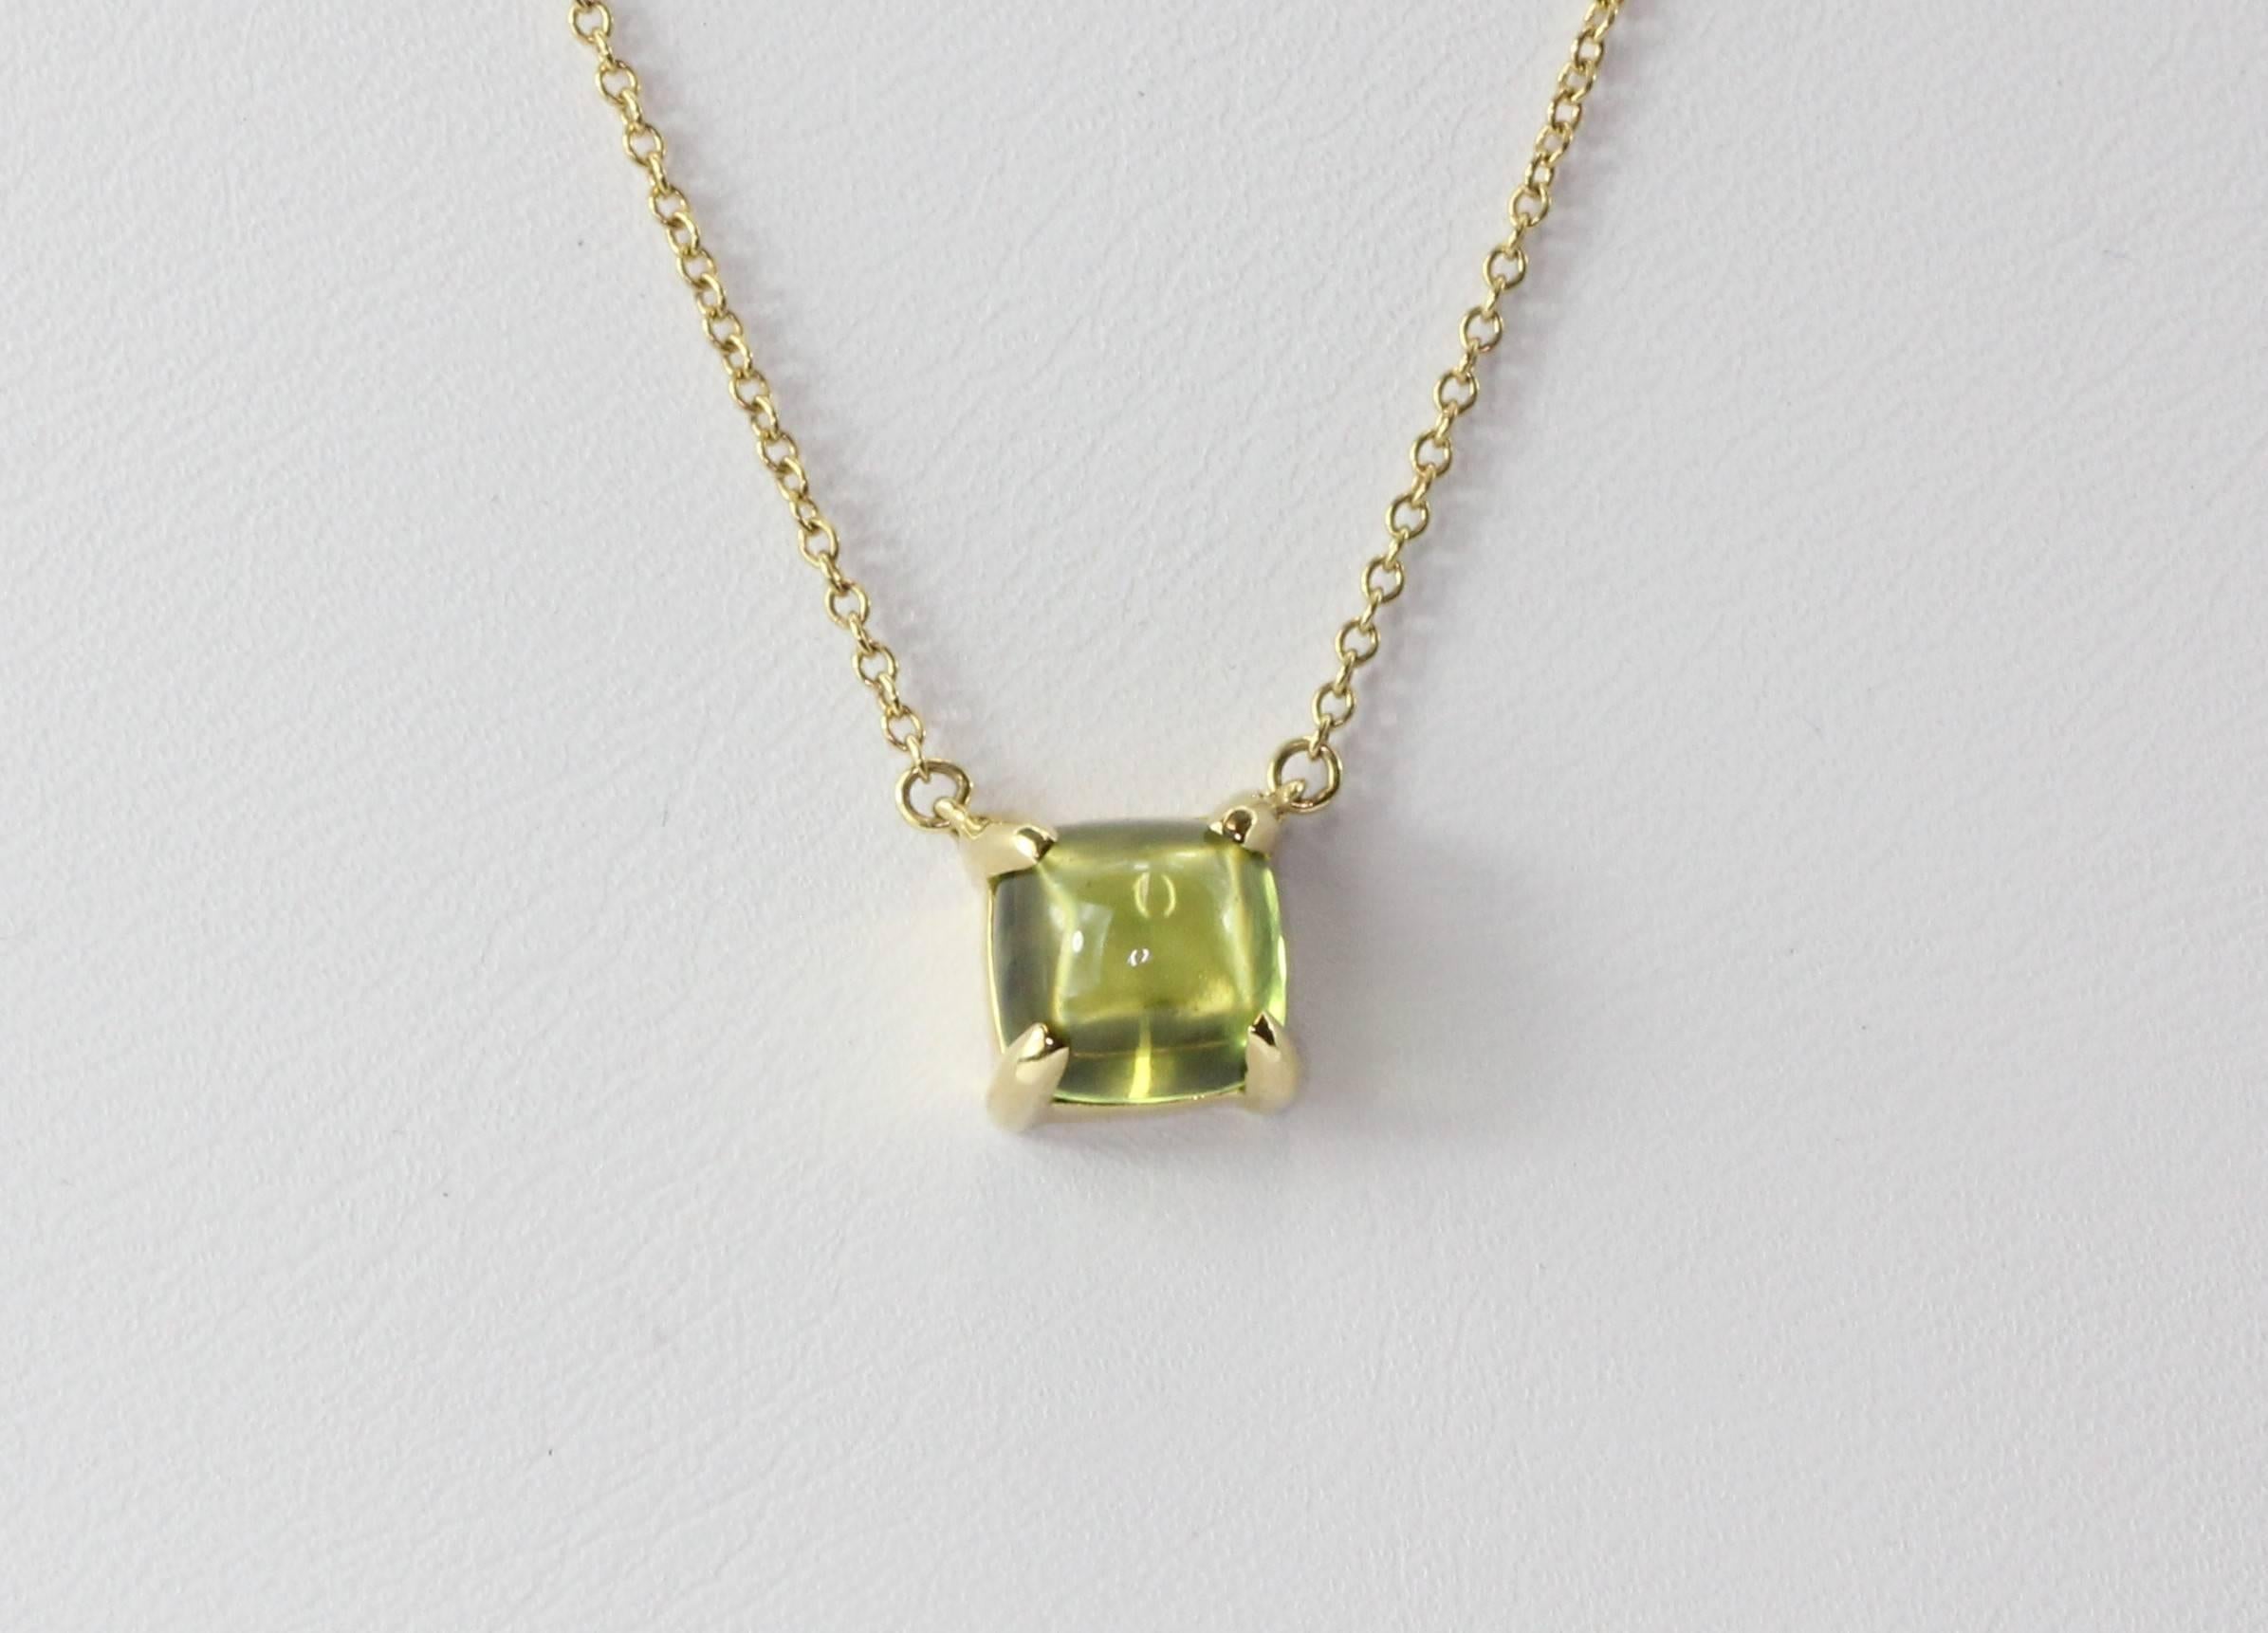 Tiffany 18K Gold Paloma Picasso Sugar Stack Peridot Necklace. The necklace is in excellent estate condition and ready to wear. It comes its original Tiffany case. The necklace is signed "T&Co 750 Paloma Picasso.  The necklace measures